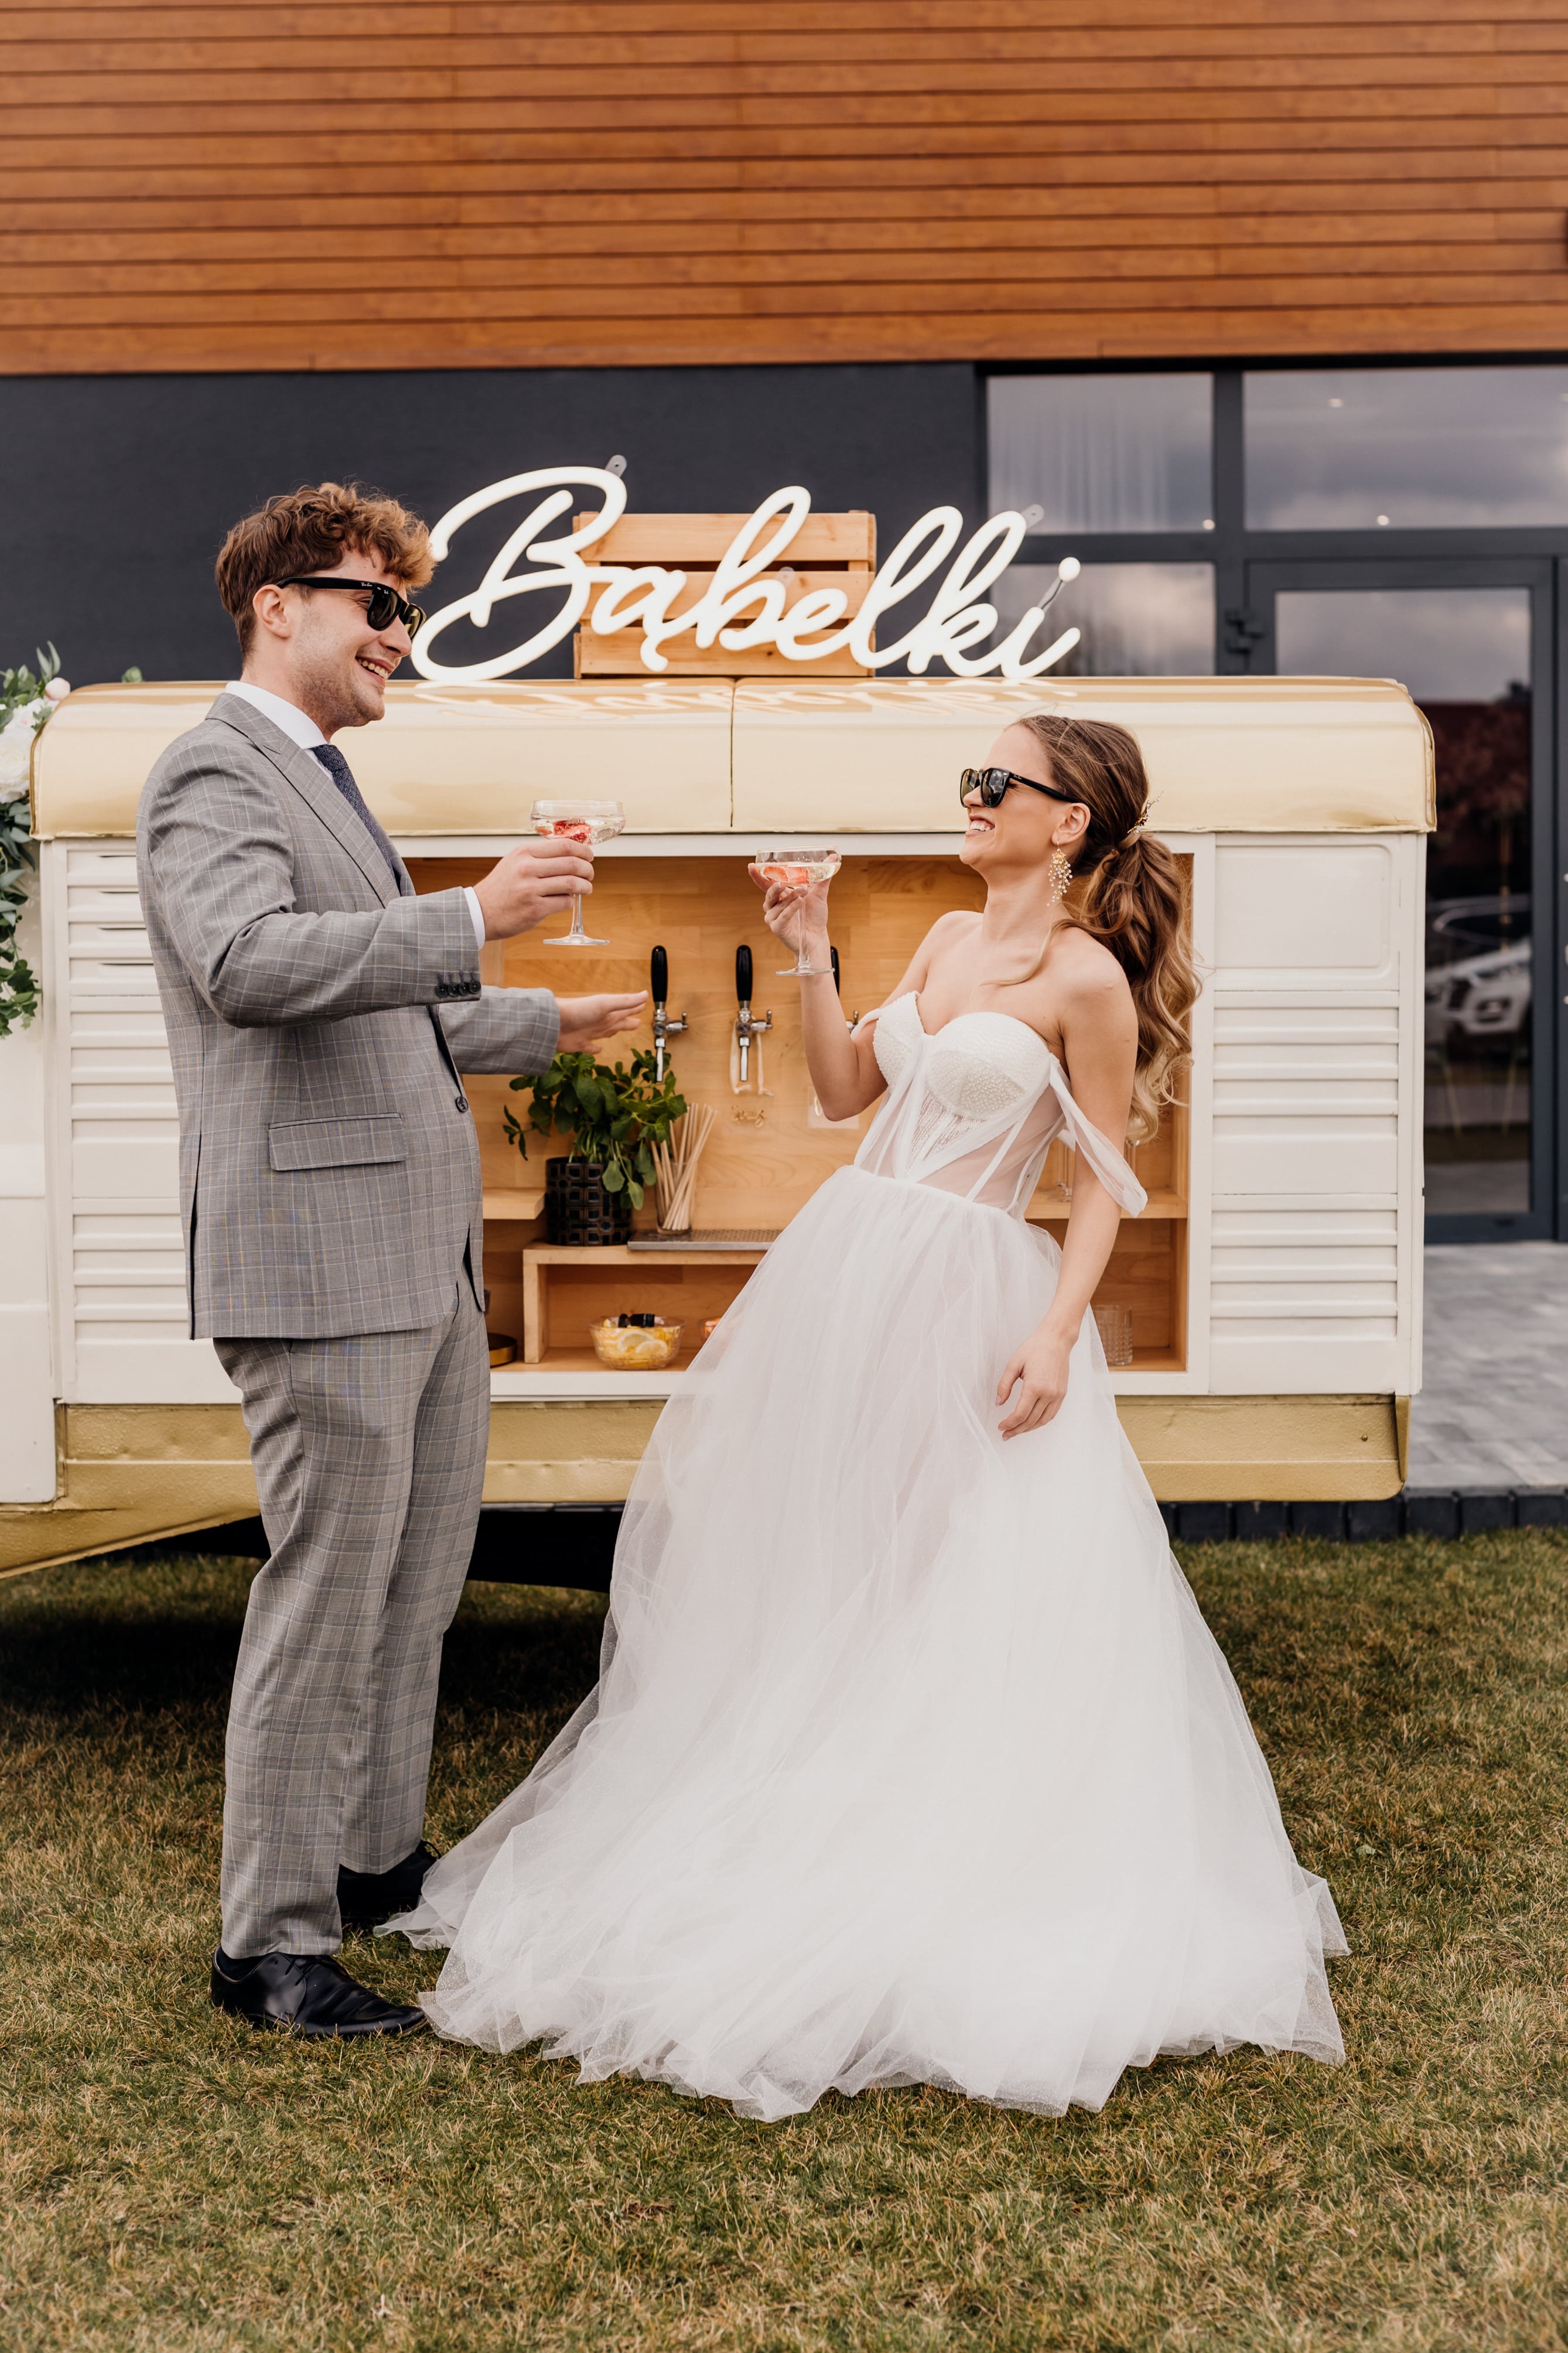 A groom and a bride posing with glasses of prosecco in the garden in front of a van